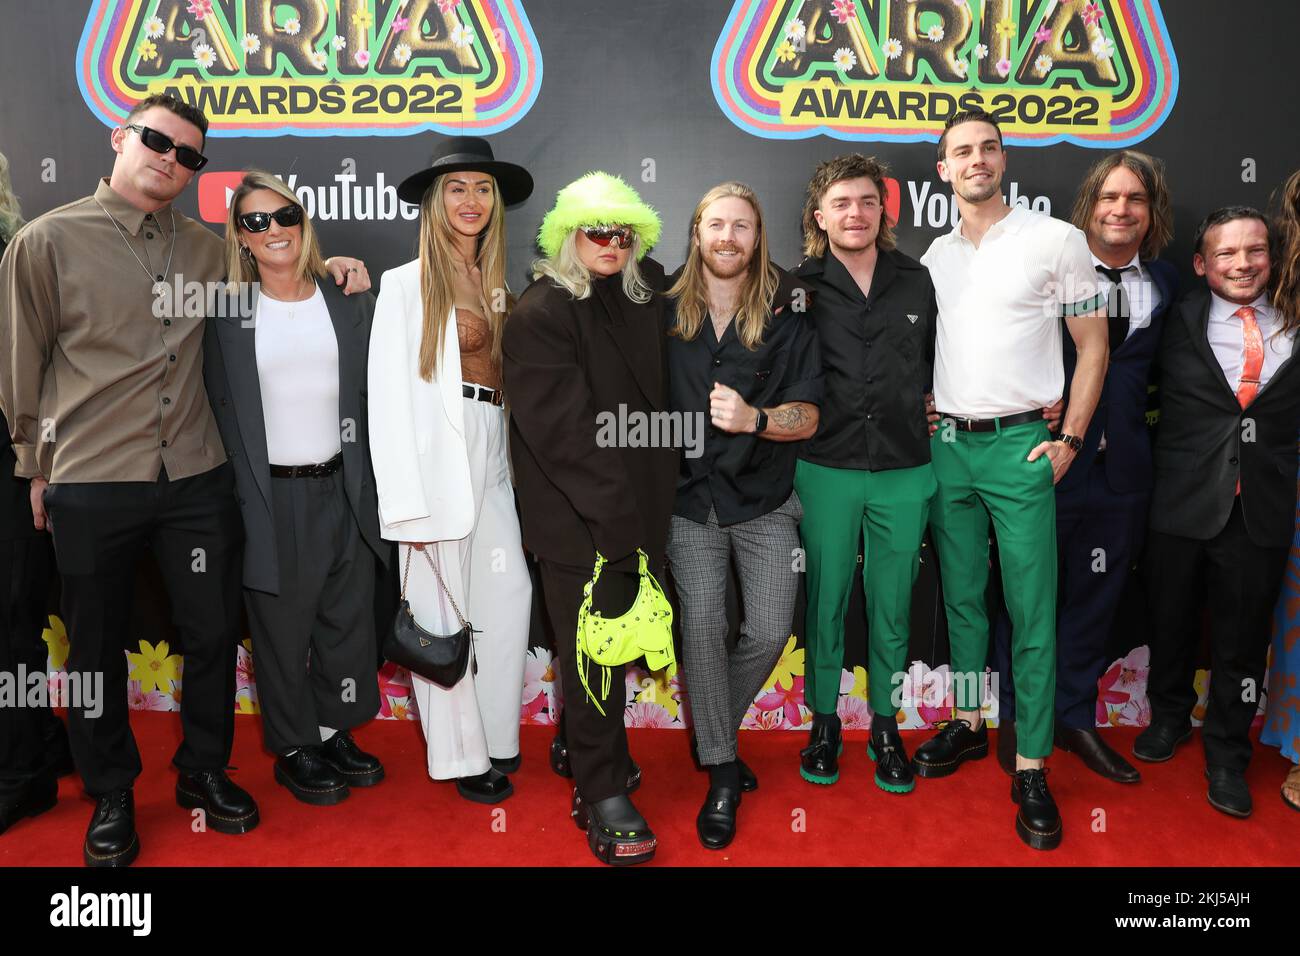 November 24, 2022: TONES AND I walking the red carpet at the 36th Annual ARIA Awards at The Hordern Pavilion on November 24, 2022 in Sydney, NSW Australia  (Credit Image: © Christopher Khoury/Australian Press Agency via ZUMA  Wire) Stock Photo